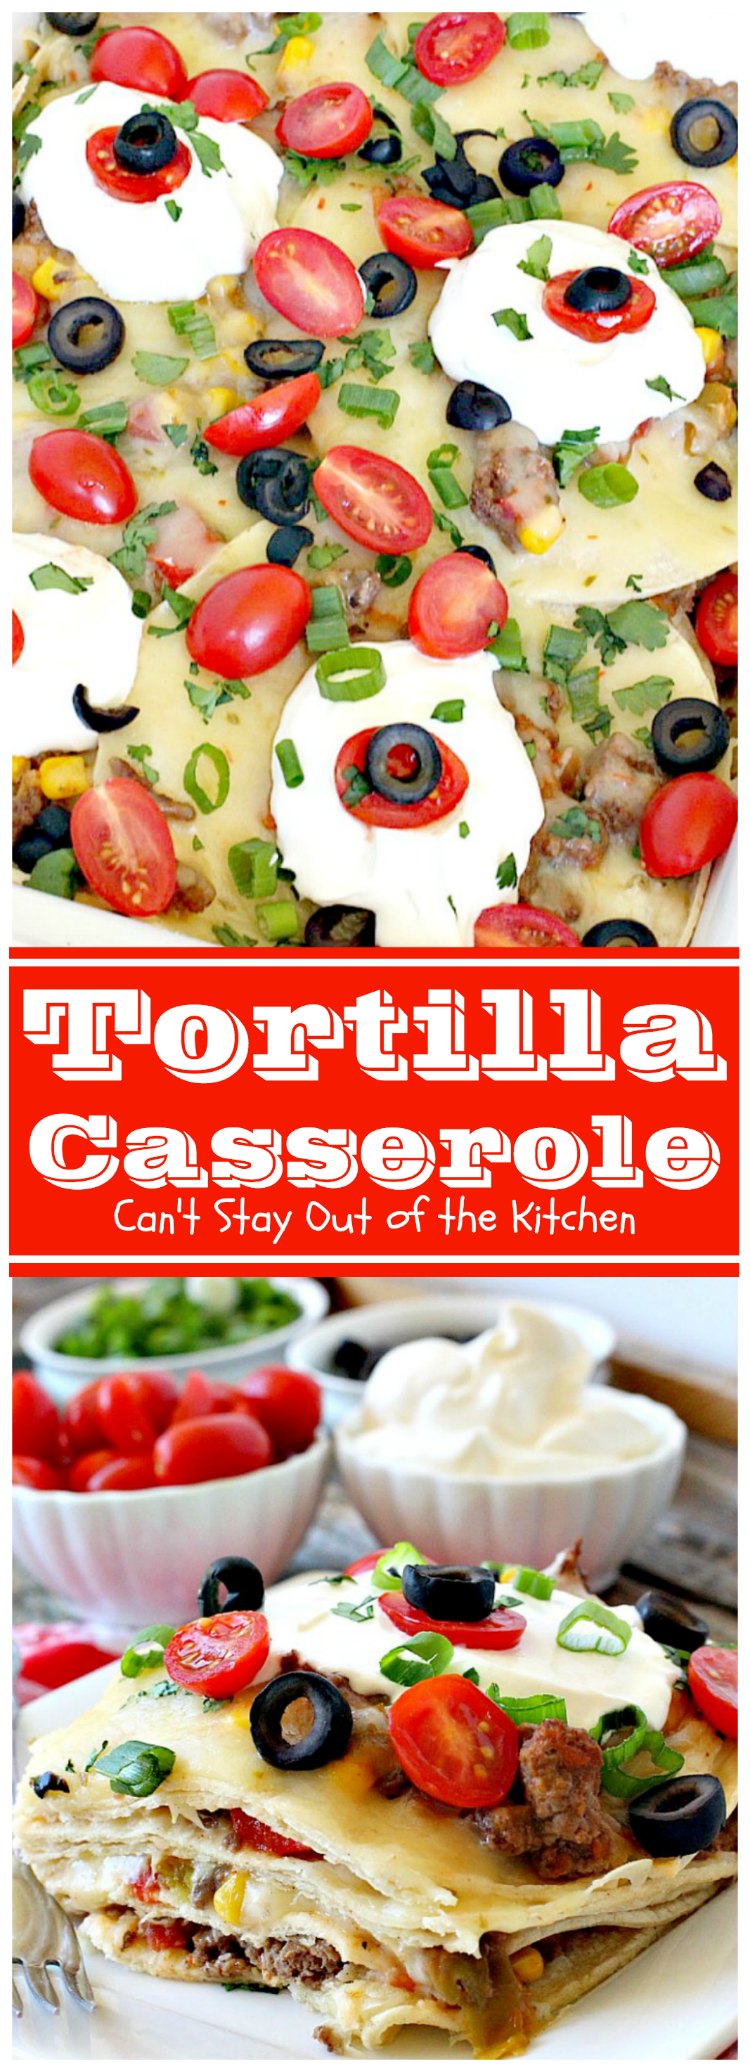 Tortilla Casserole | Can't Stay Out of the Kitchen | this is a delicious #TexMex layered #casserole like a #Mexican #lasagna using #tortillas instead. Makes 2 large dishes so it's perfect for company or potlucks. #beef